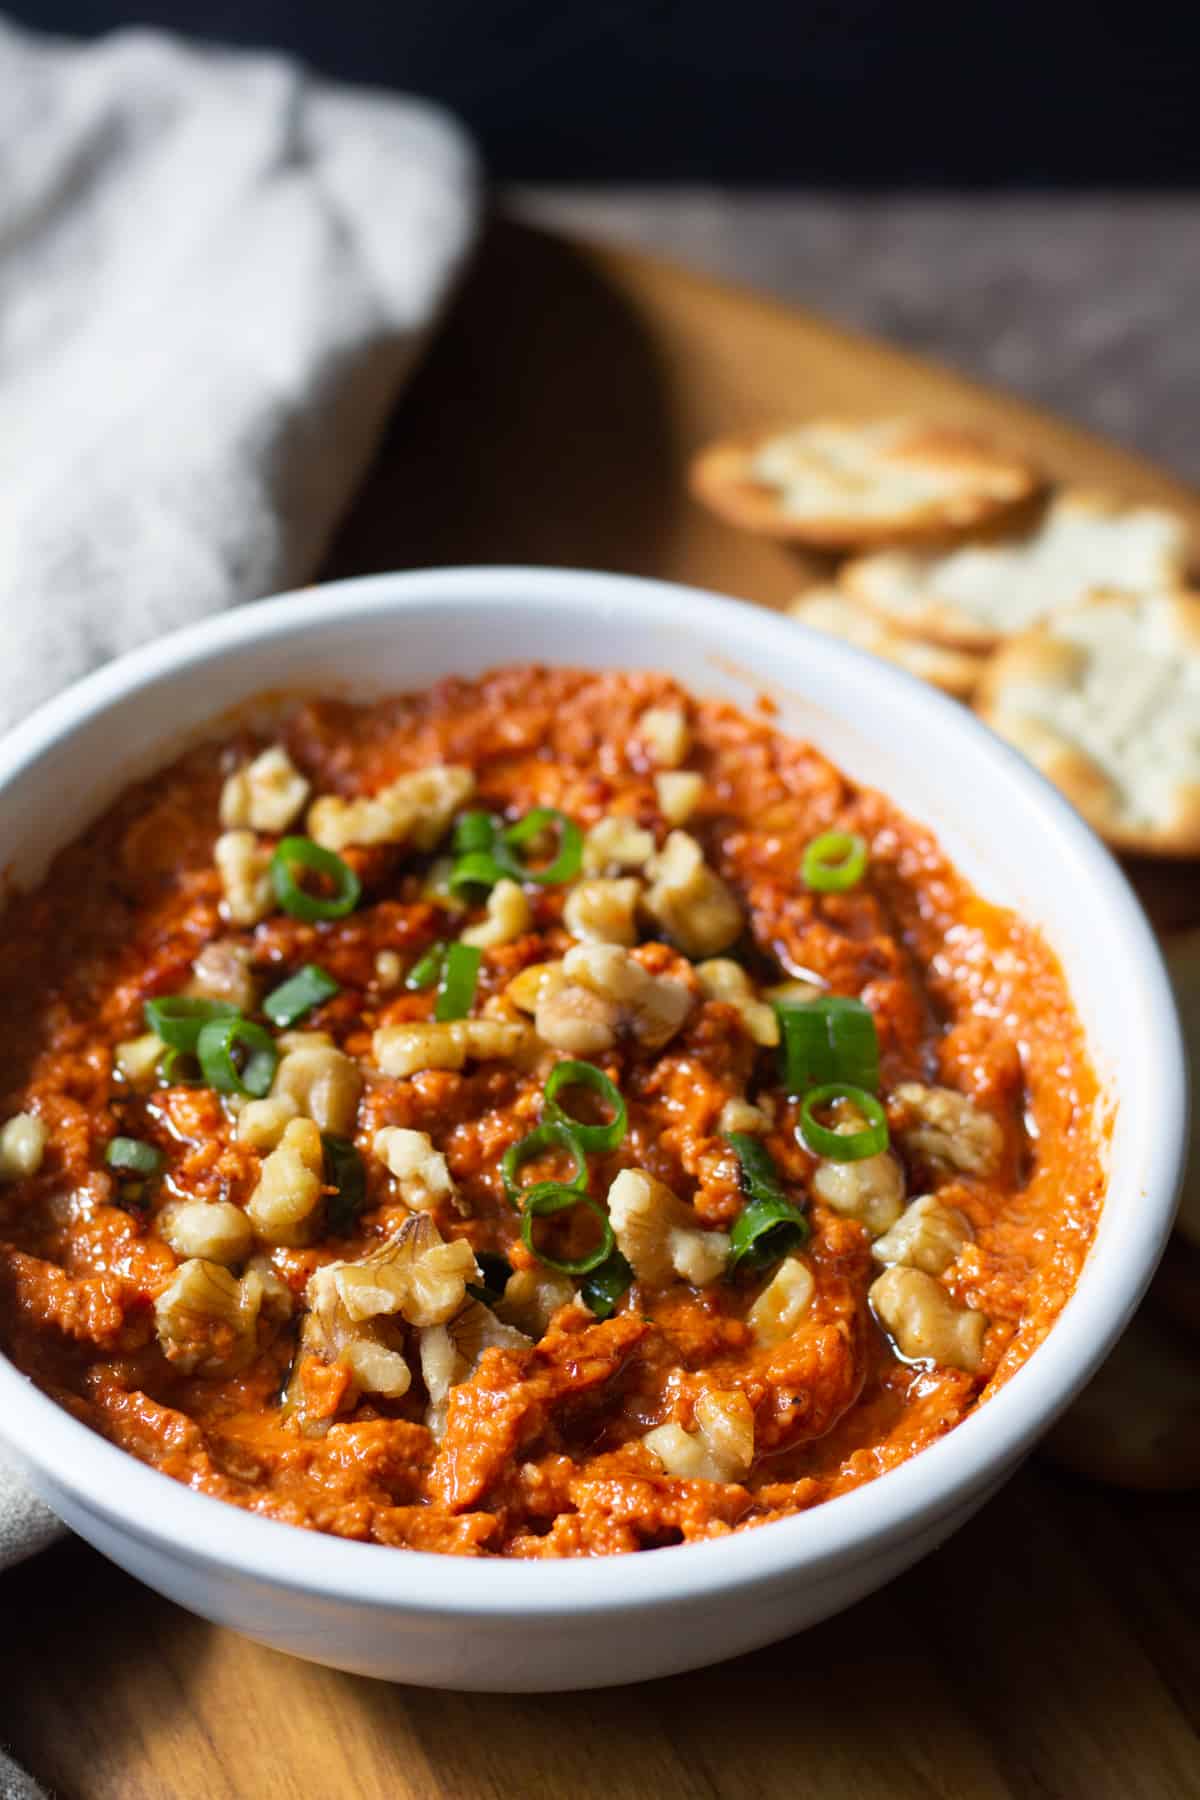 Roasted red pepper dip topped with walnuts and green onion